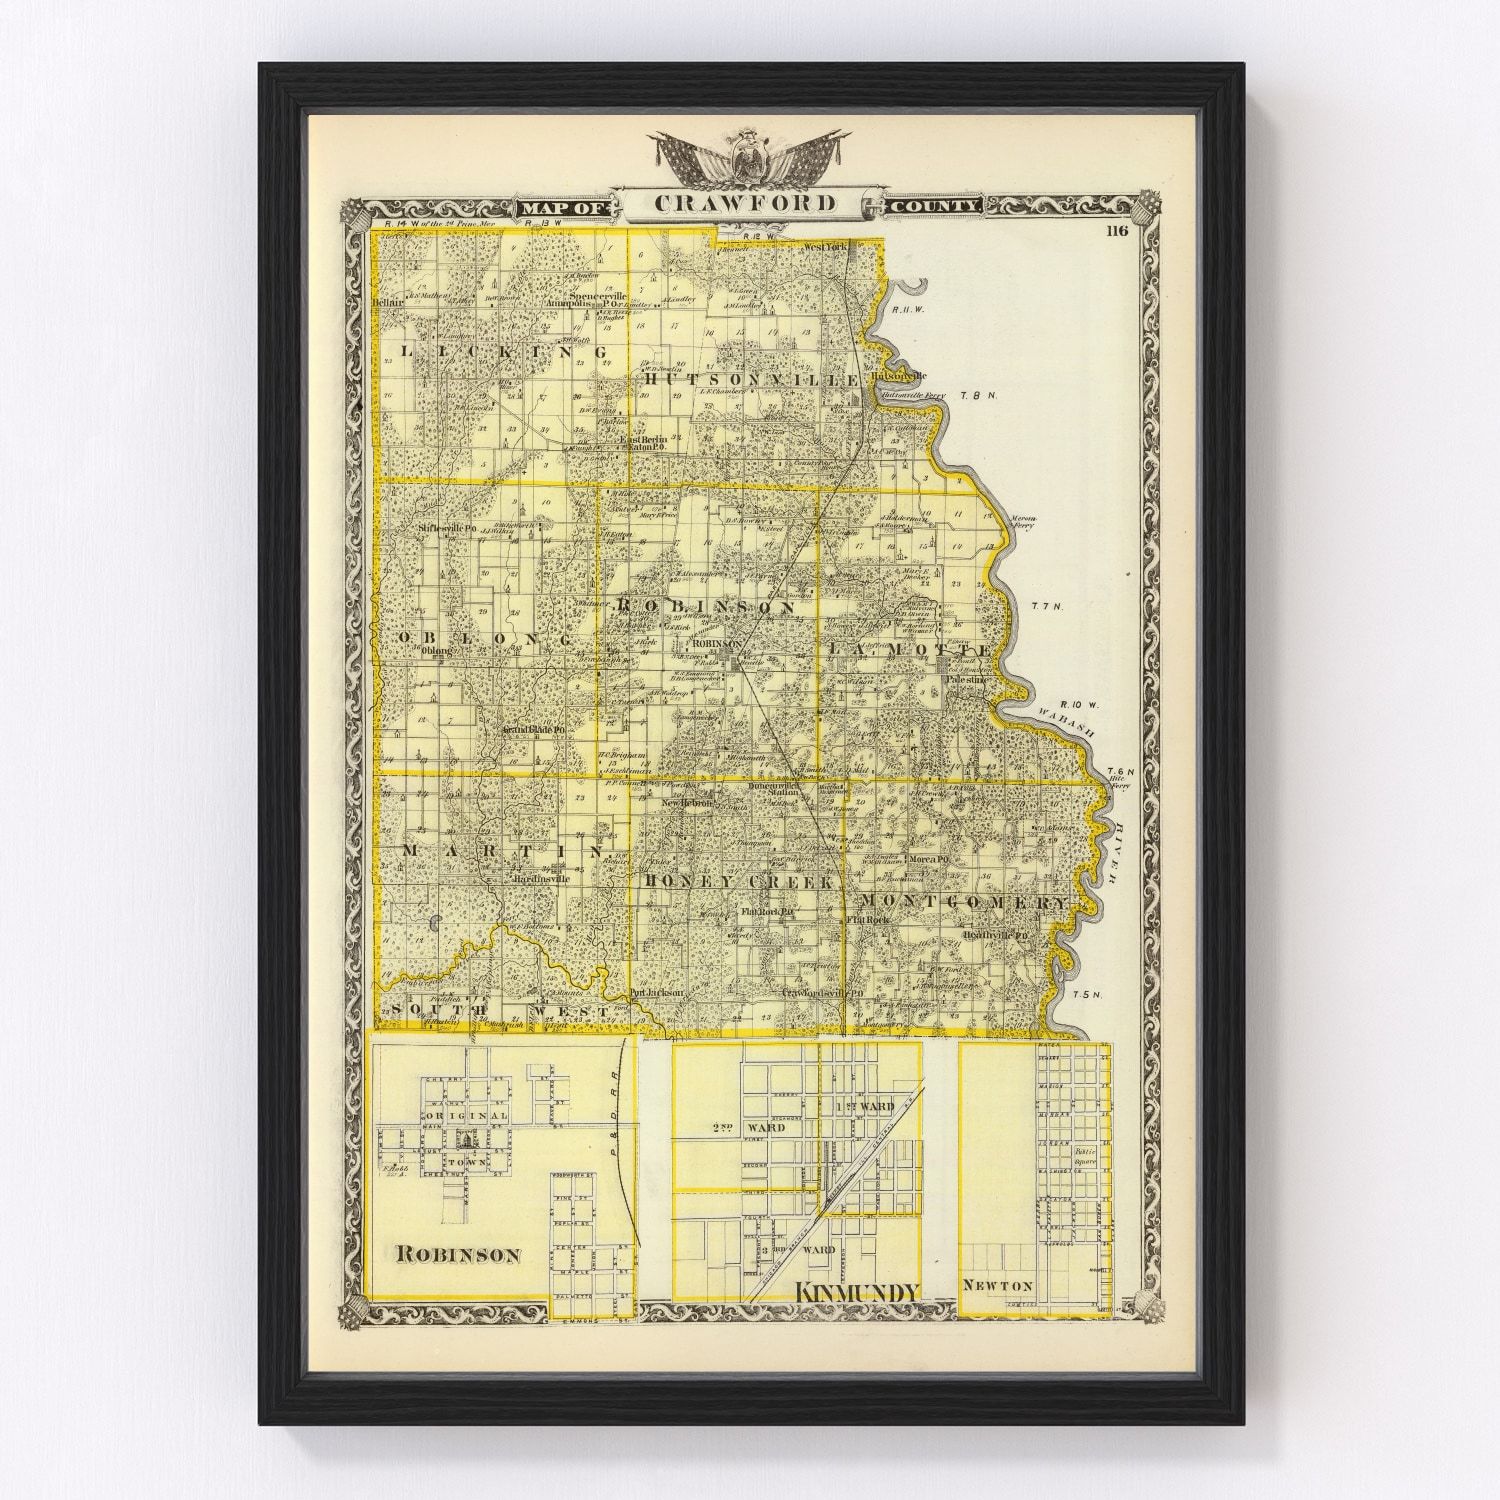 Vintage Map Of Crawford County Illinois 1876 By Teds Vintage Art 4900